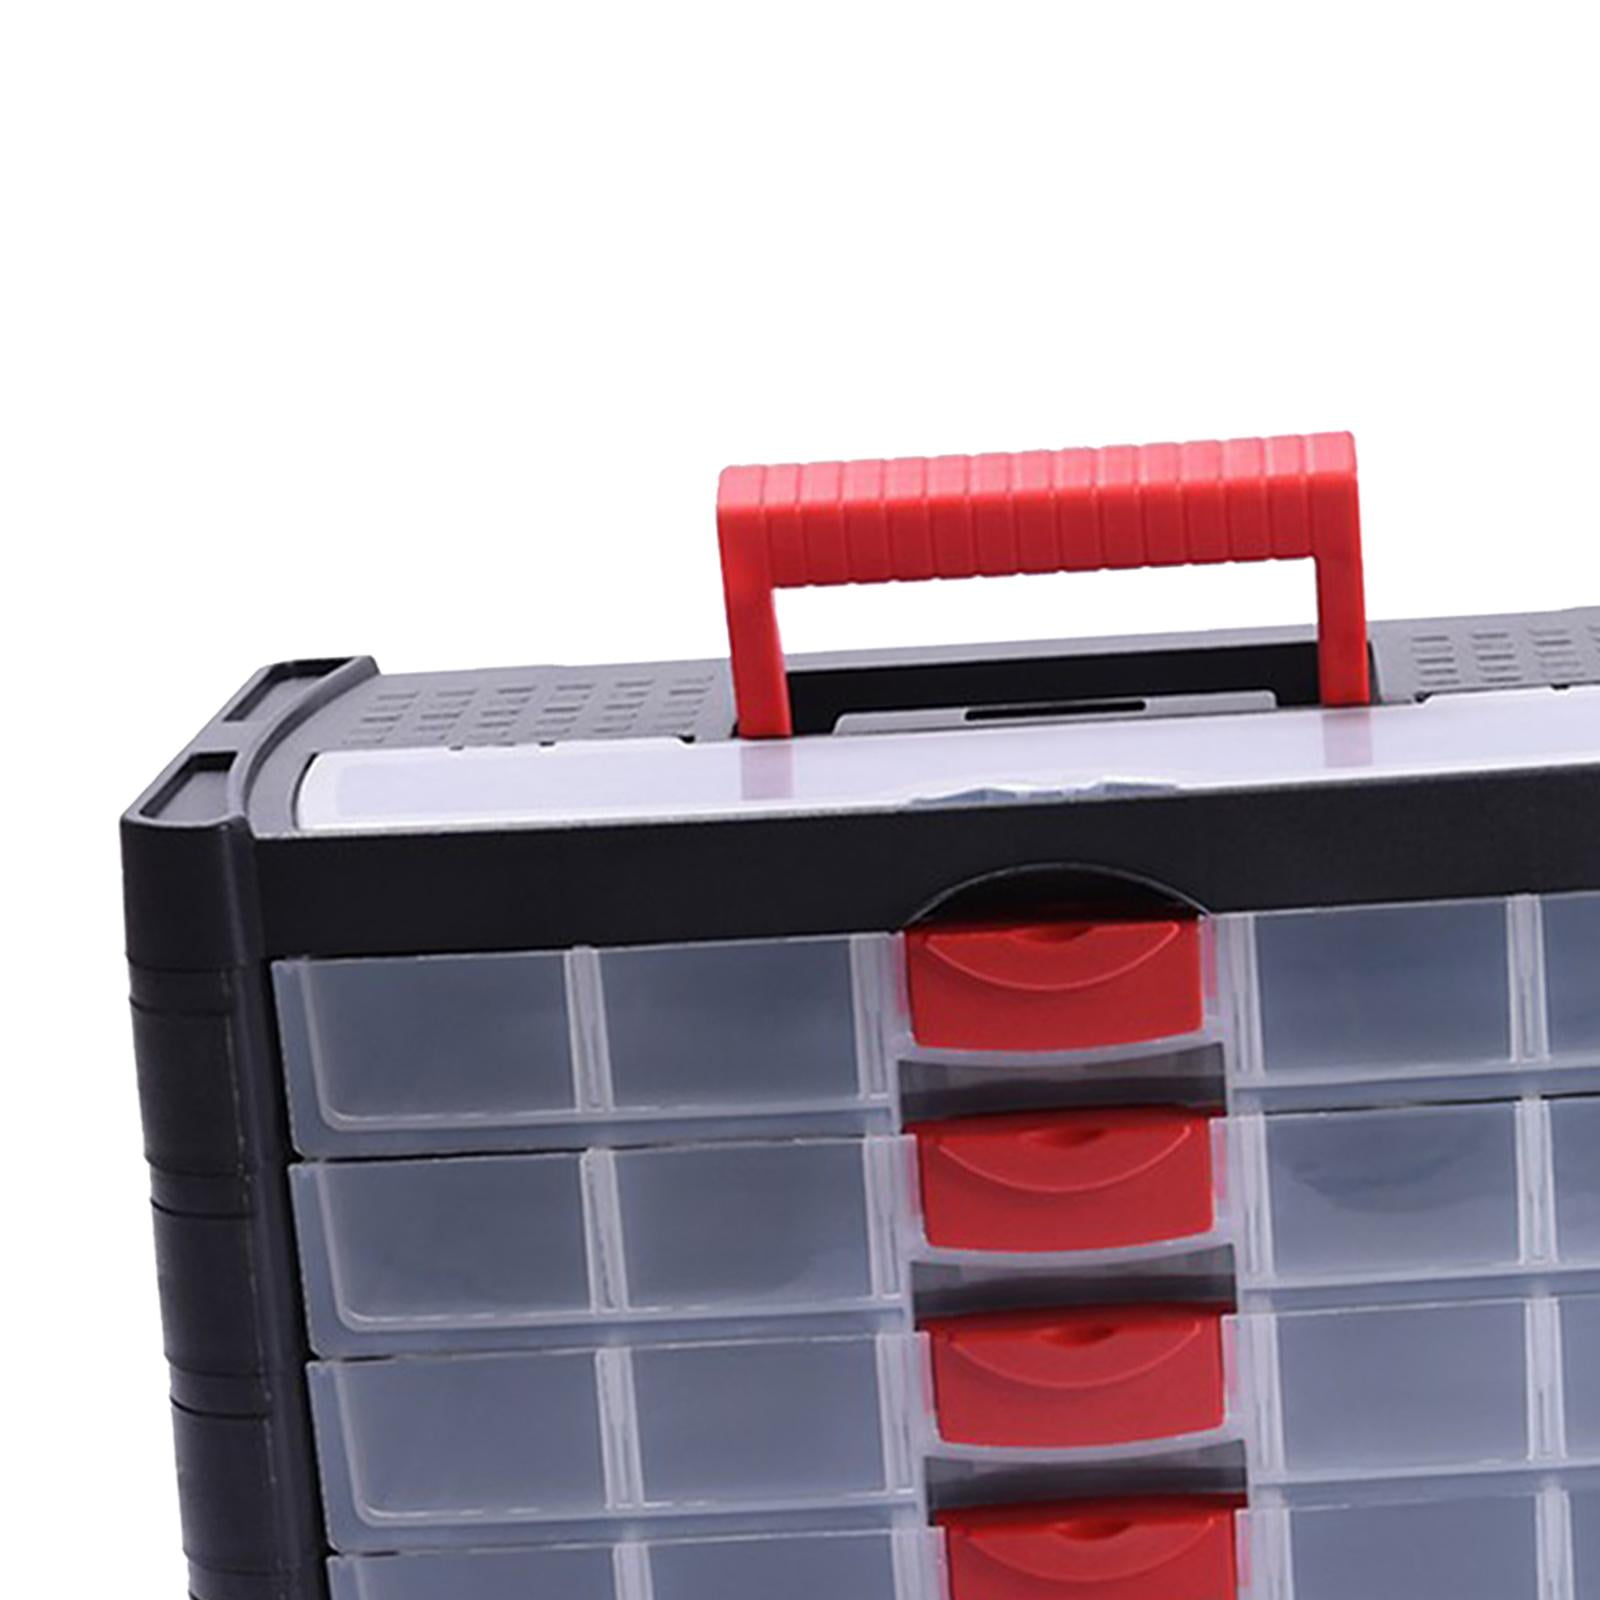 Andalus Brands andalus small parts organizer storage box set - 4